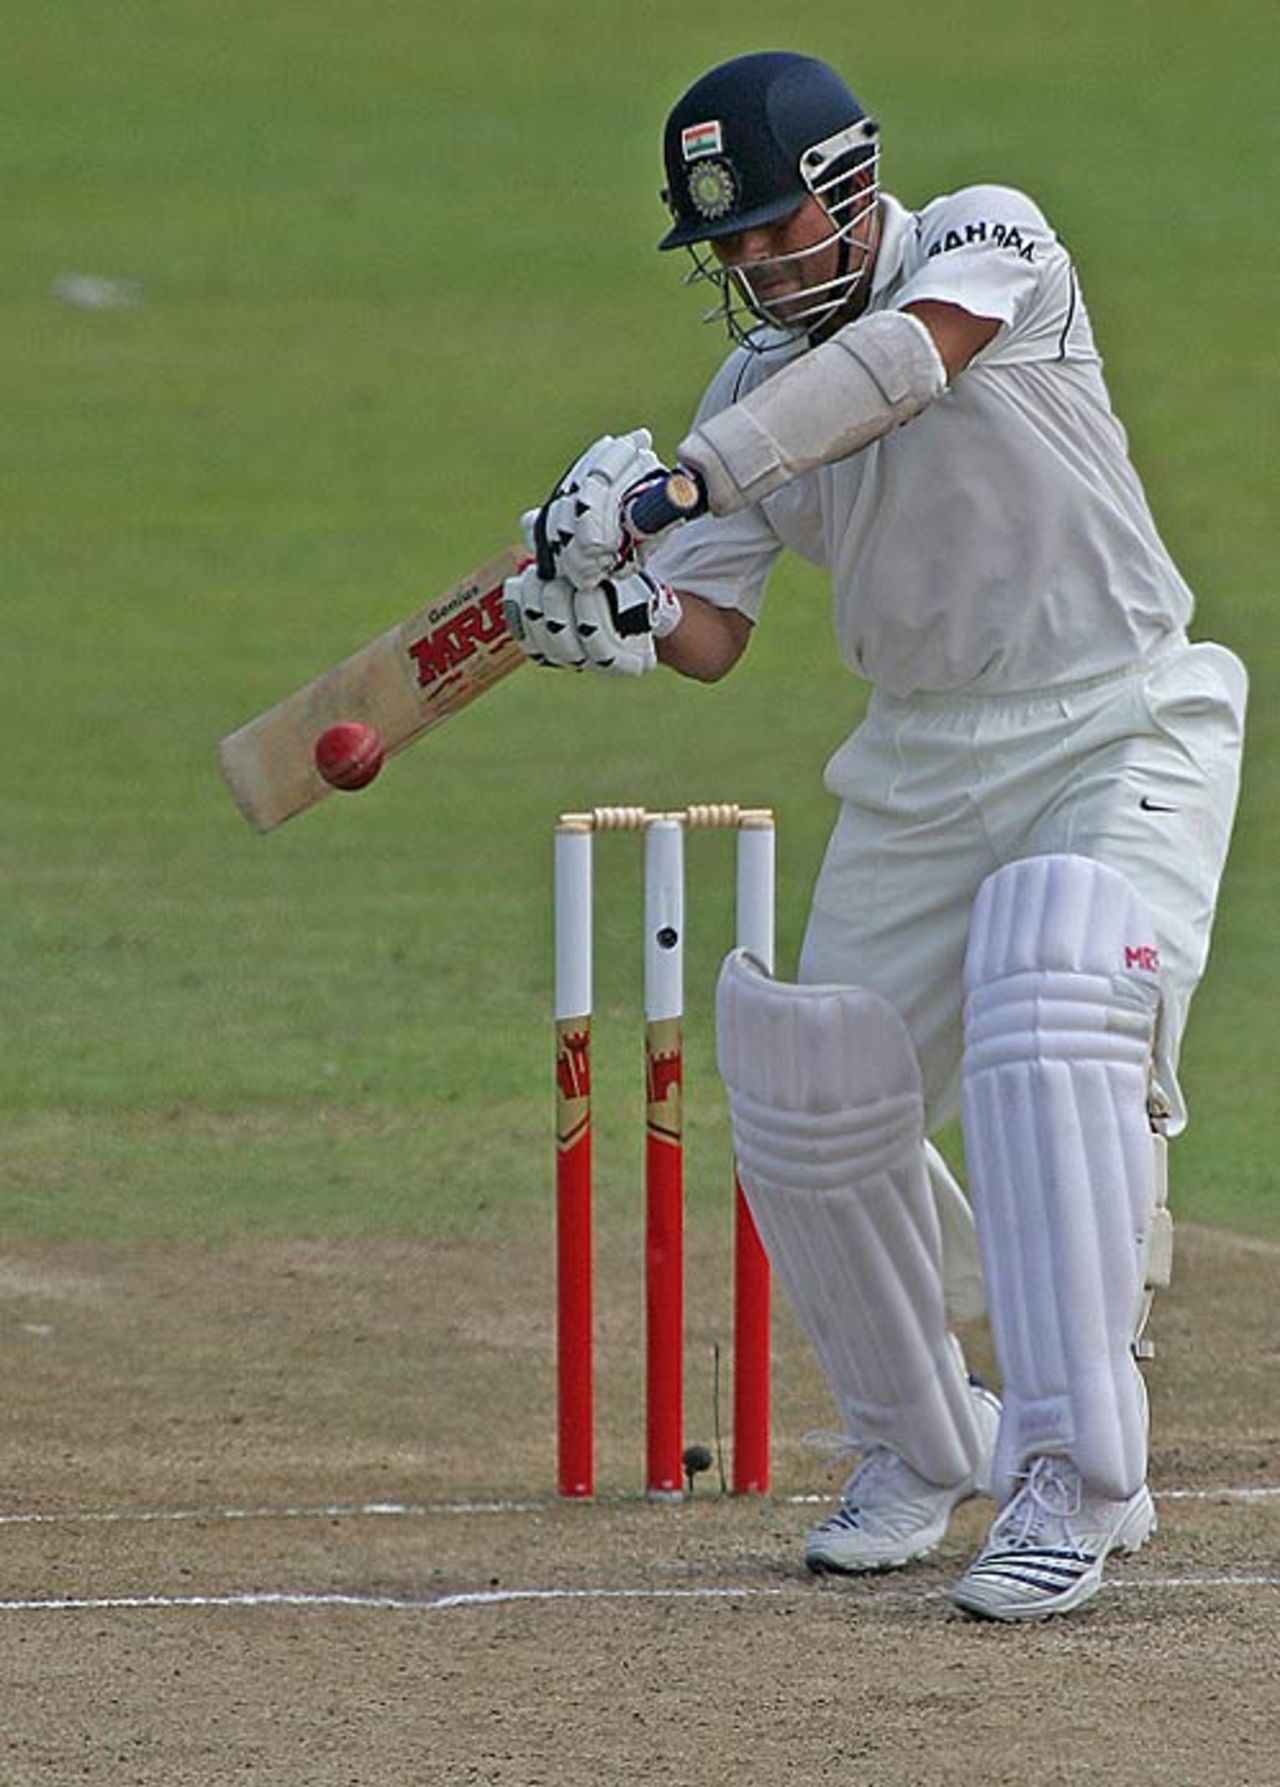 Sachin Tendulkar gets in position to slice one past point, South Africa v India, 2nd Test, Durban, 2nd day, December 27, 2006